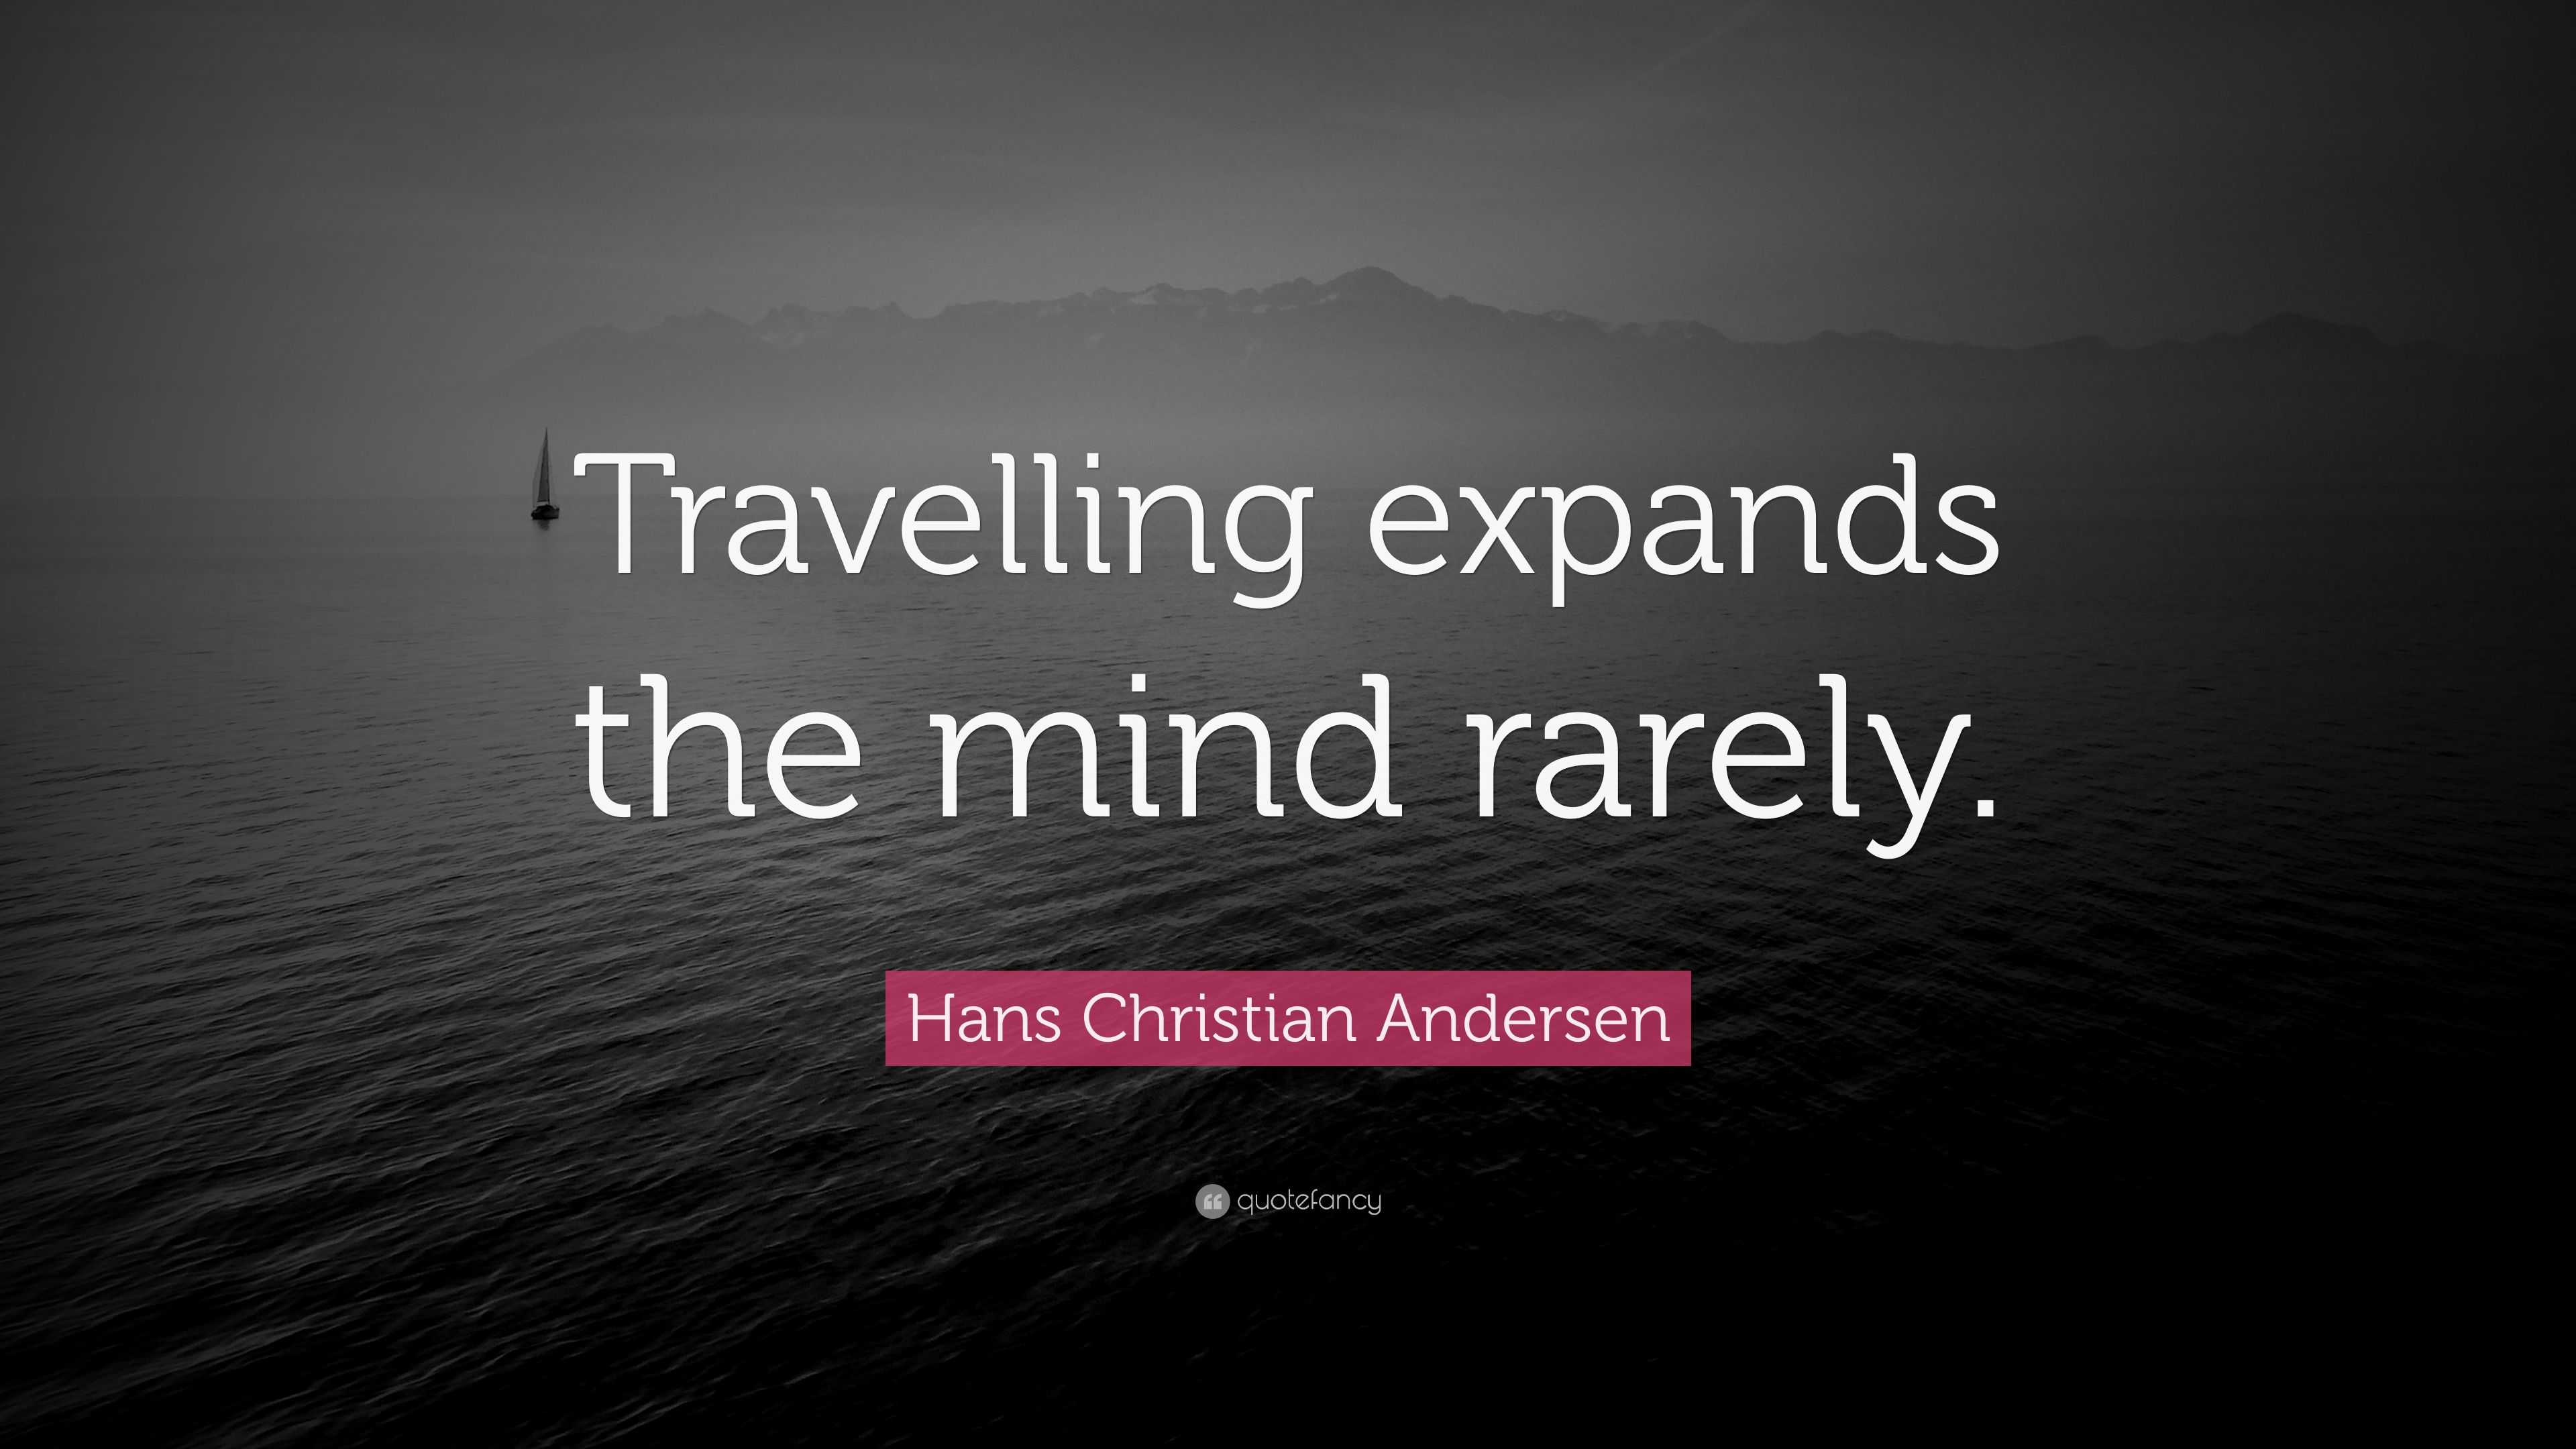 hans christian andersen quote at sfo terminal